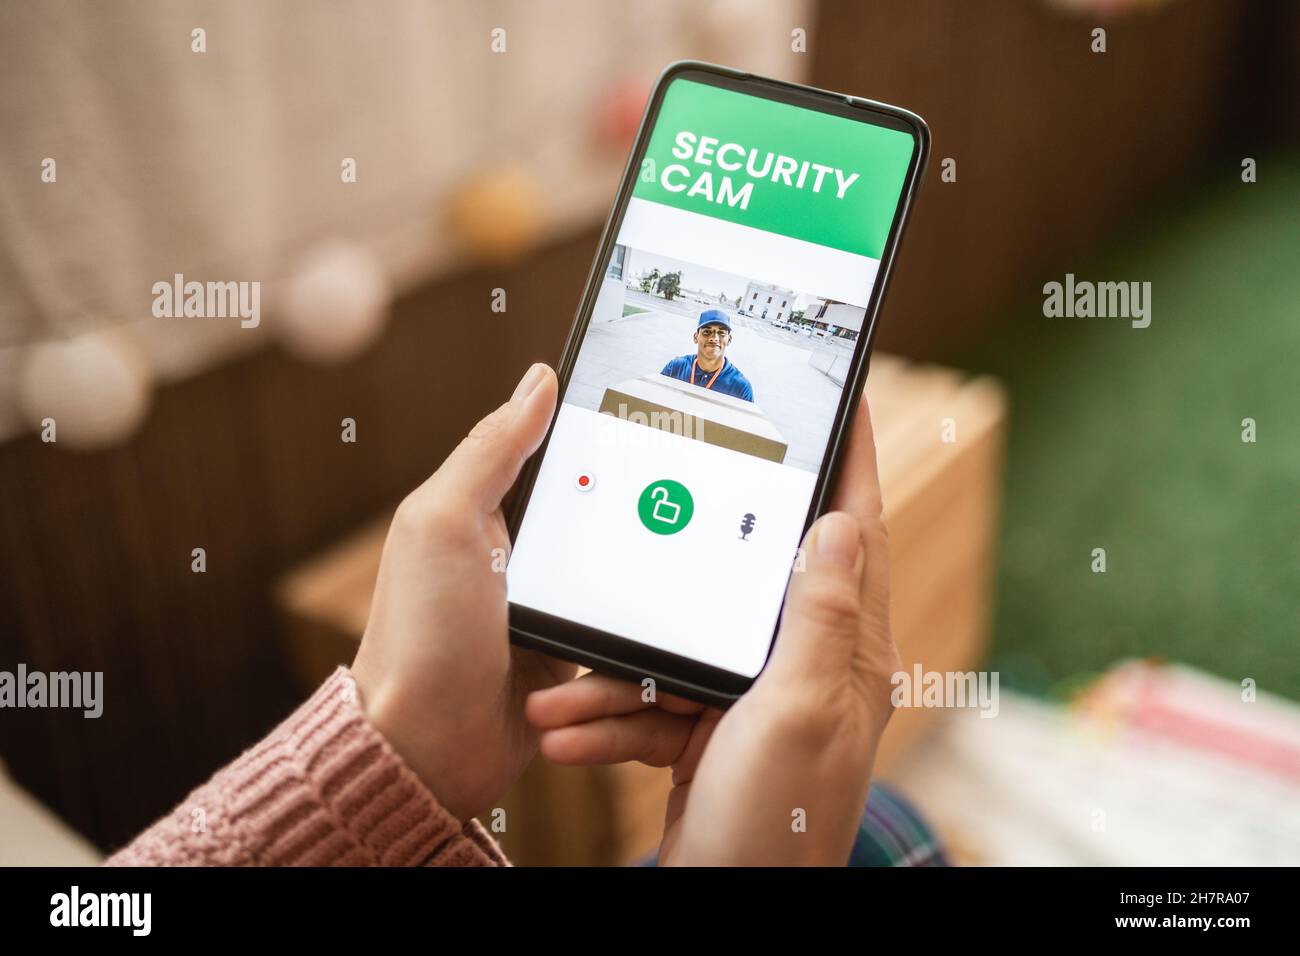 Delivery man ringing door bell on cctv secure camera system on mobile phone app Stock Photo